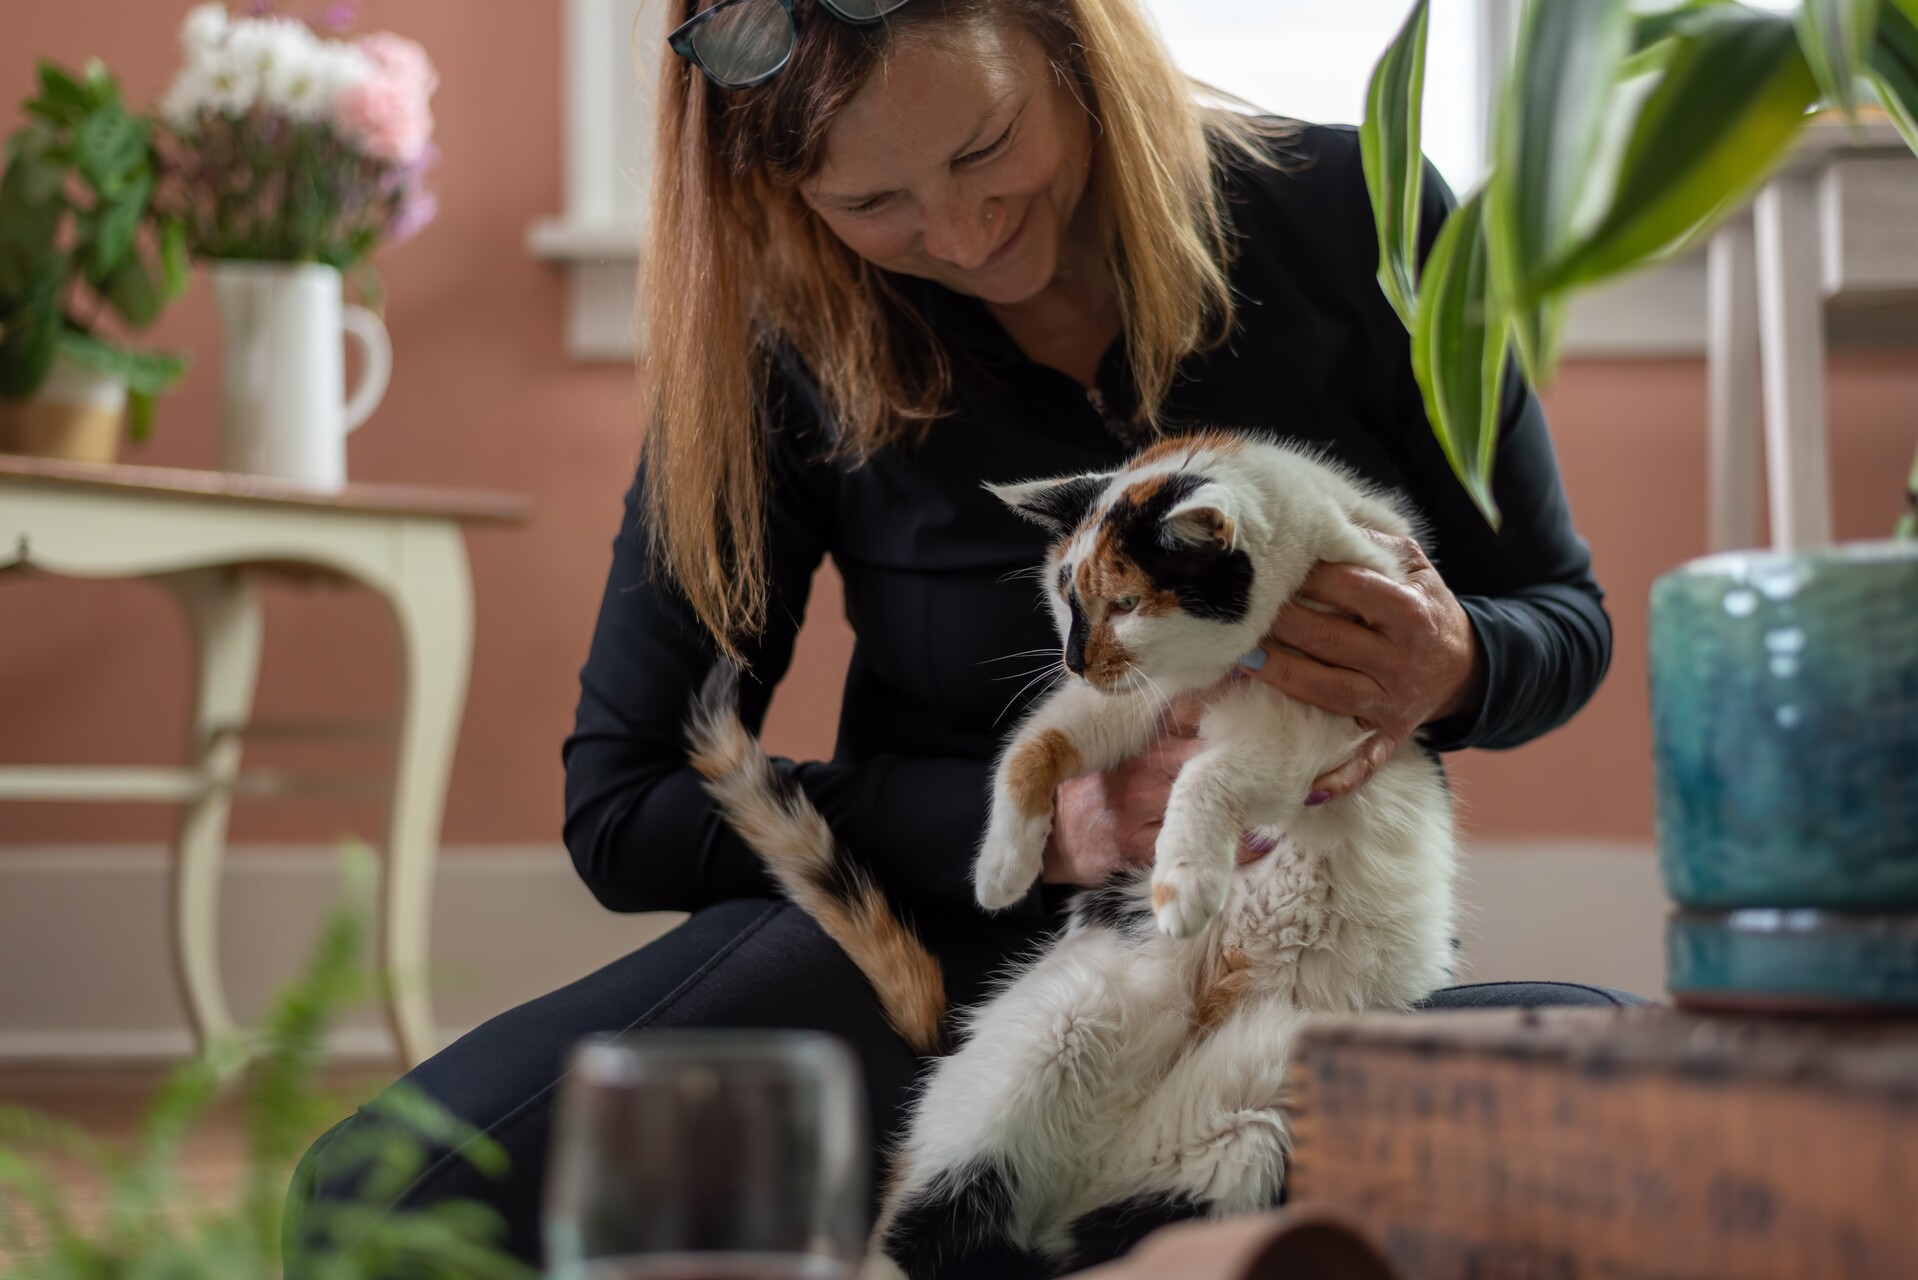 A woman sitting with a cat next to indoor plants